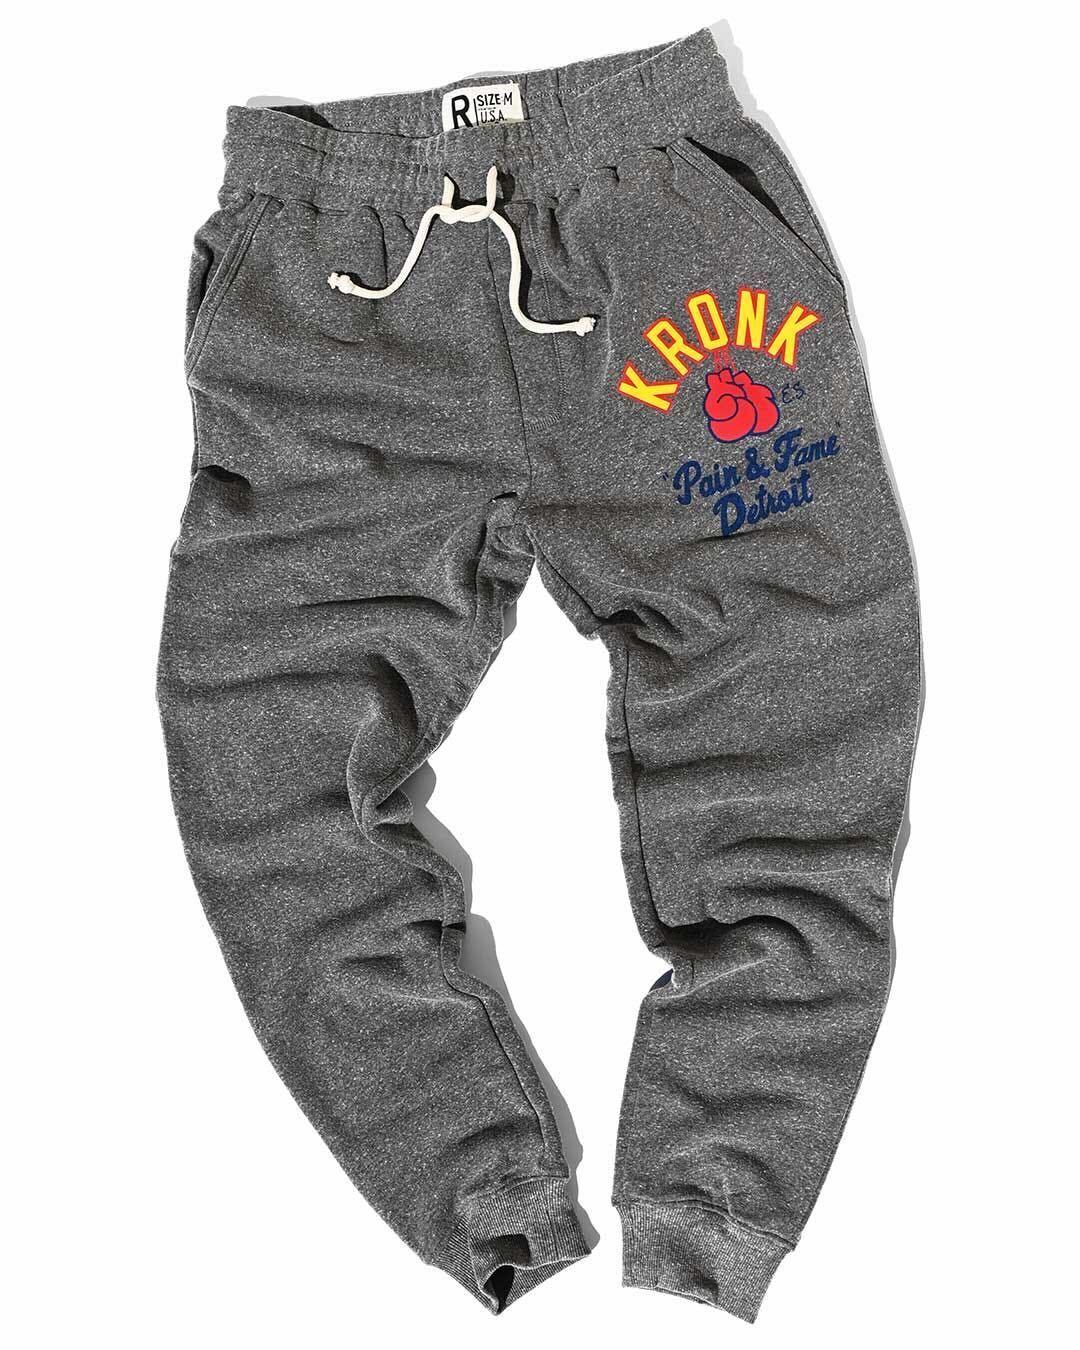 Kronk Gym Classic Grey Sweatpants - Roots of Fight